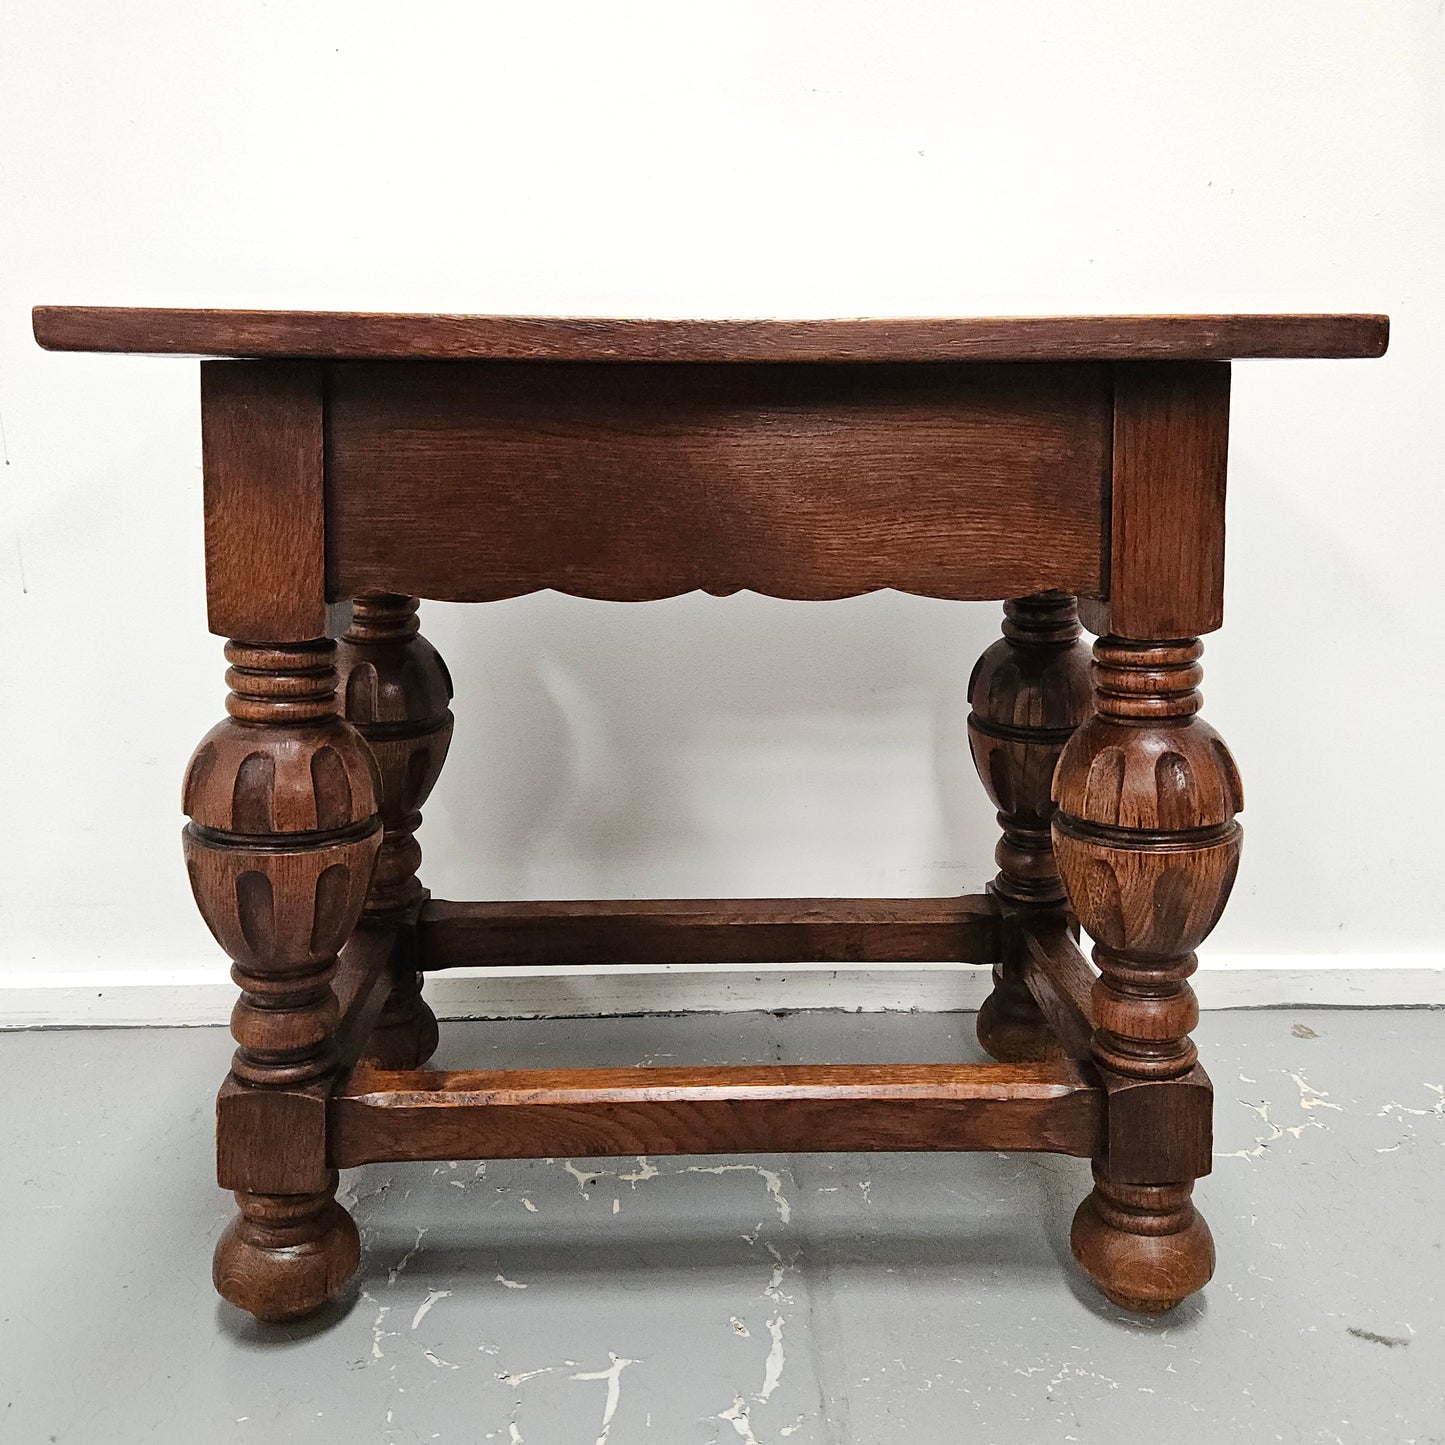 Lovely French oak 19th Century style coffee table with lovely details. It is in good original detailed condition and has been sourced directly from France.